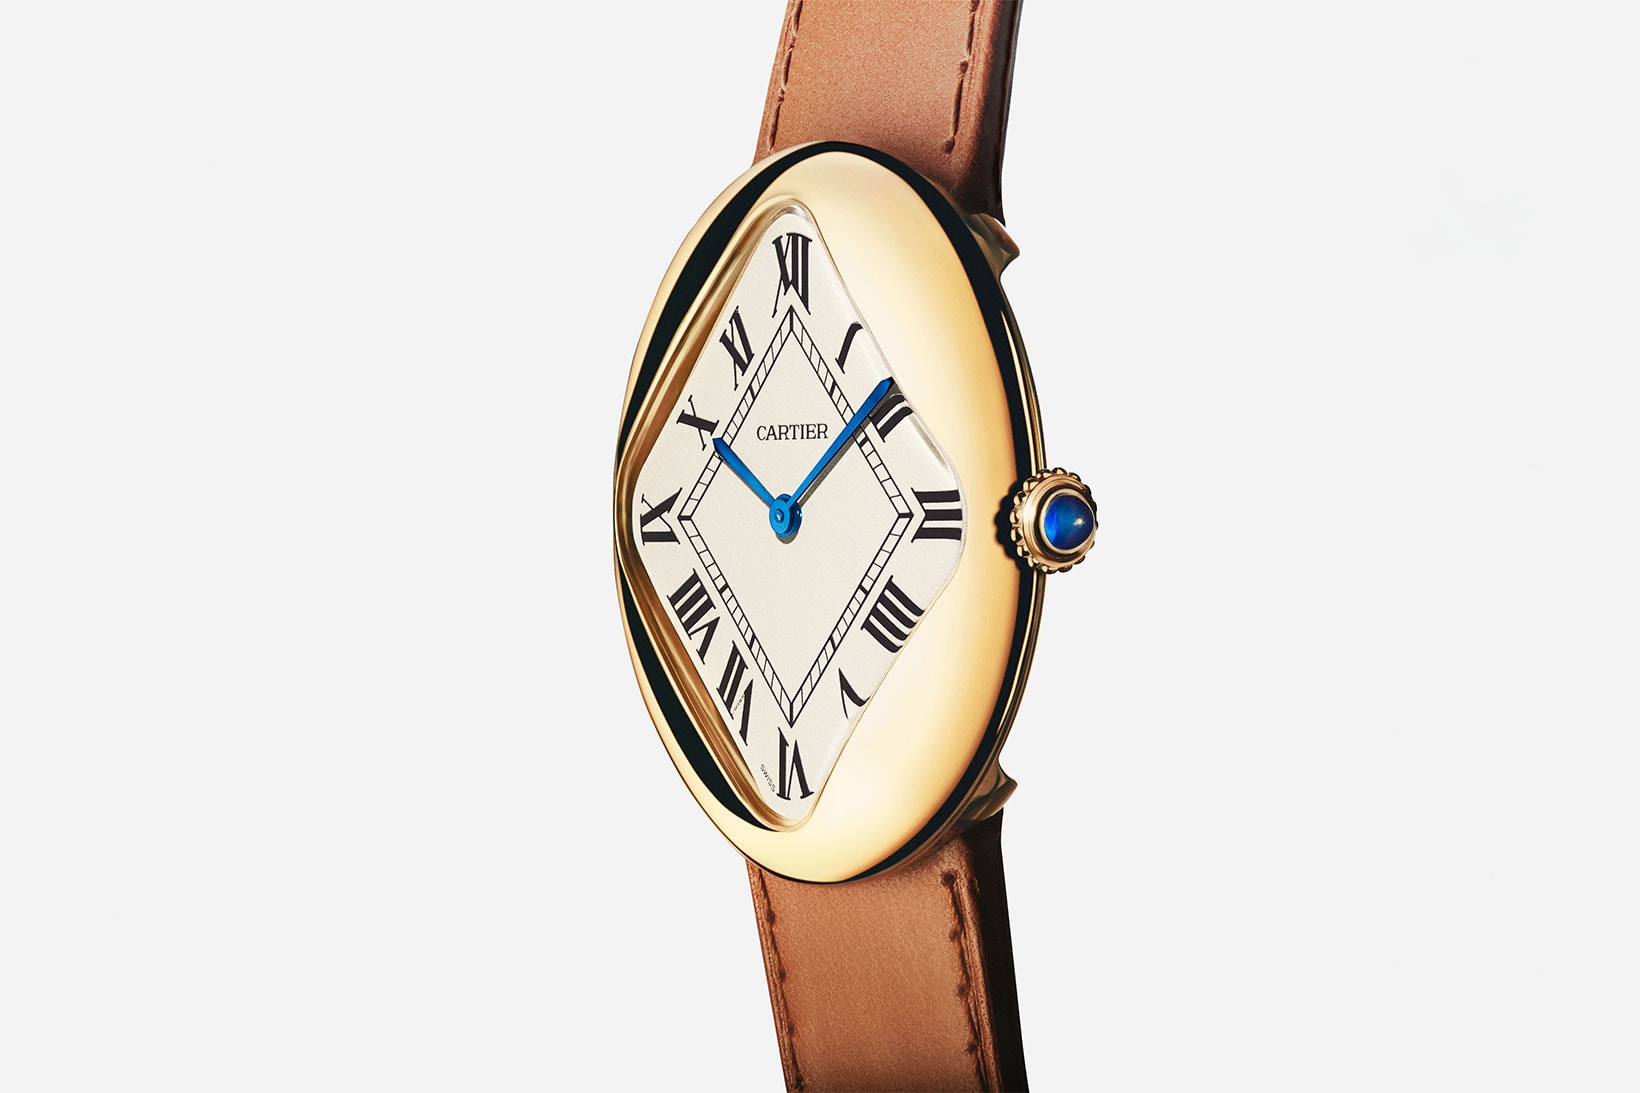 Cartier Pebble-Shaped Watch Timepiece Release Images WGPB0003 Launch